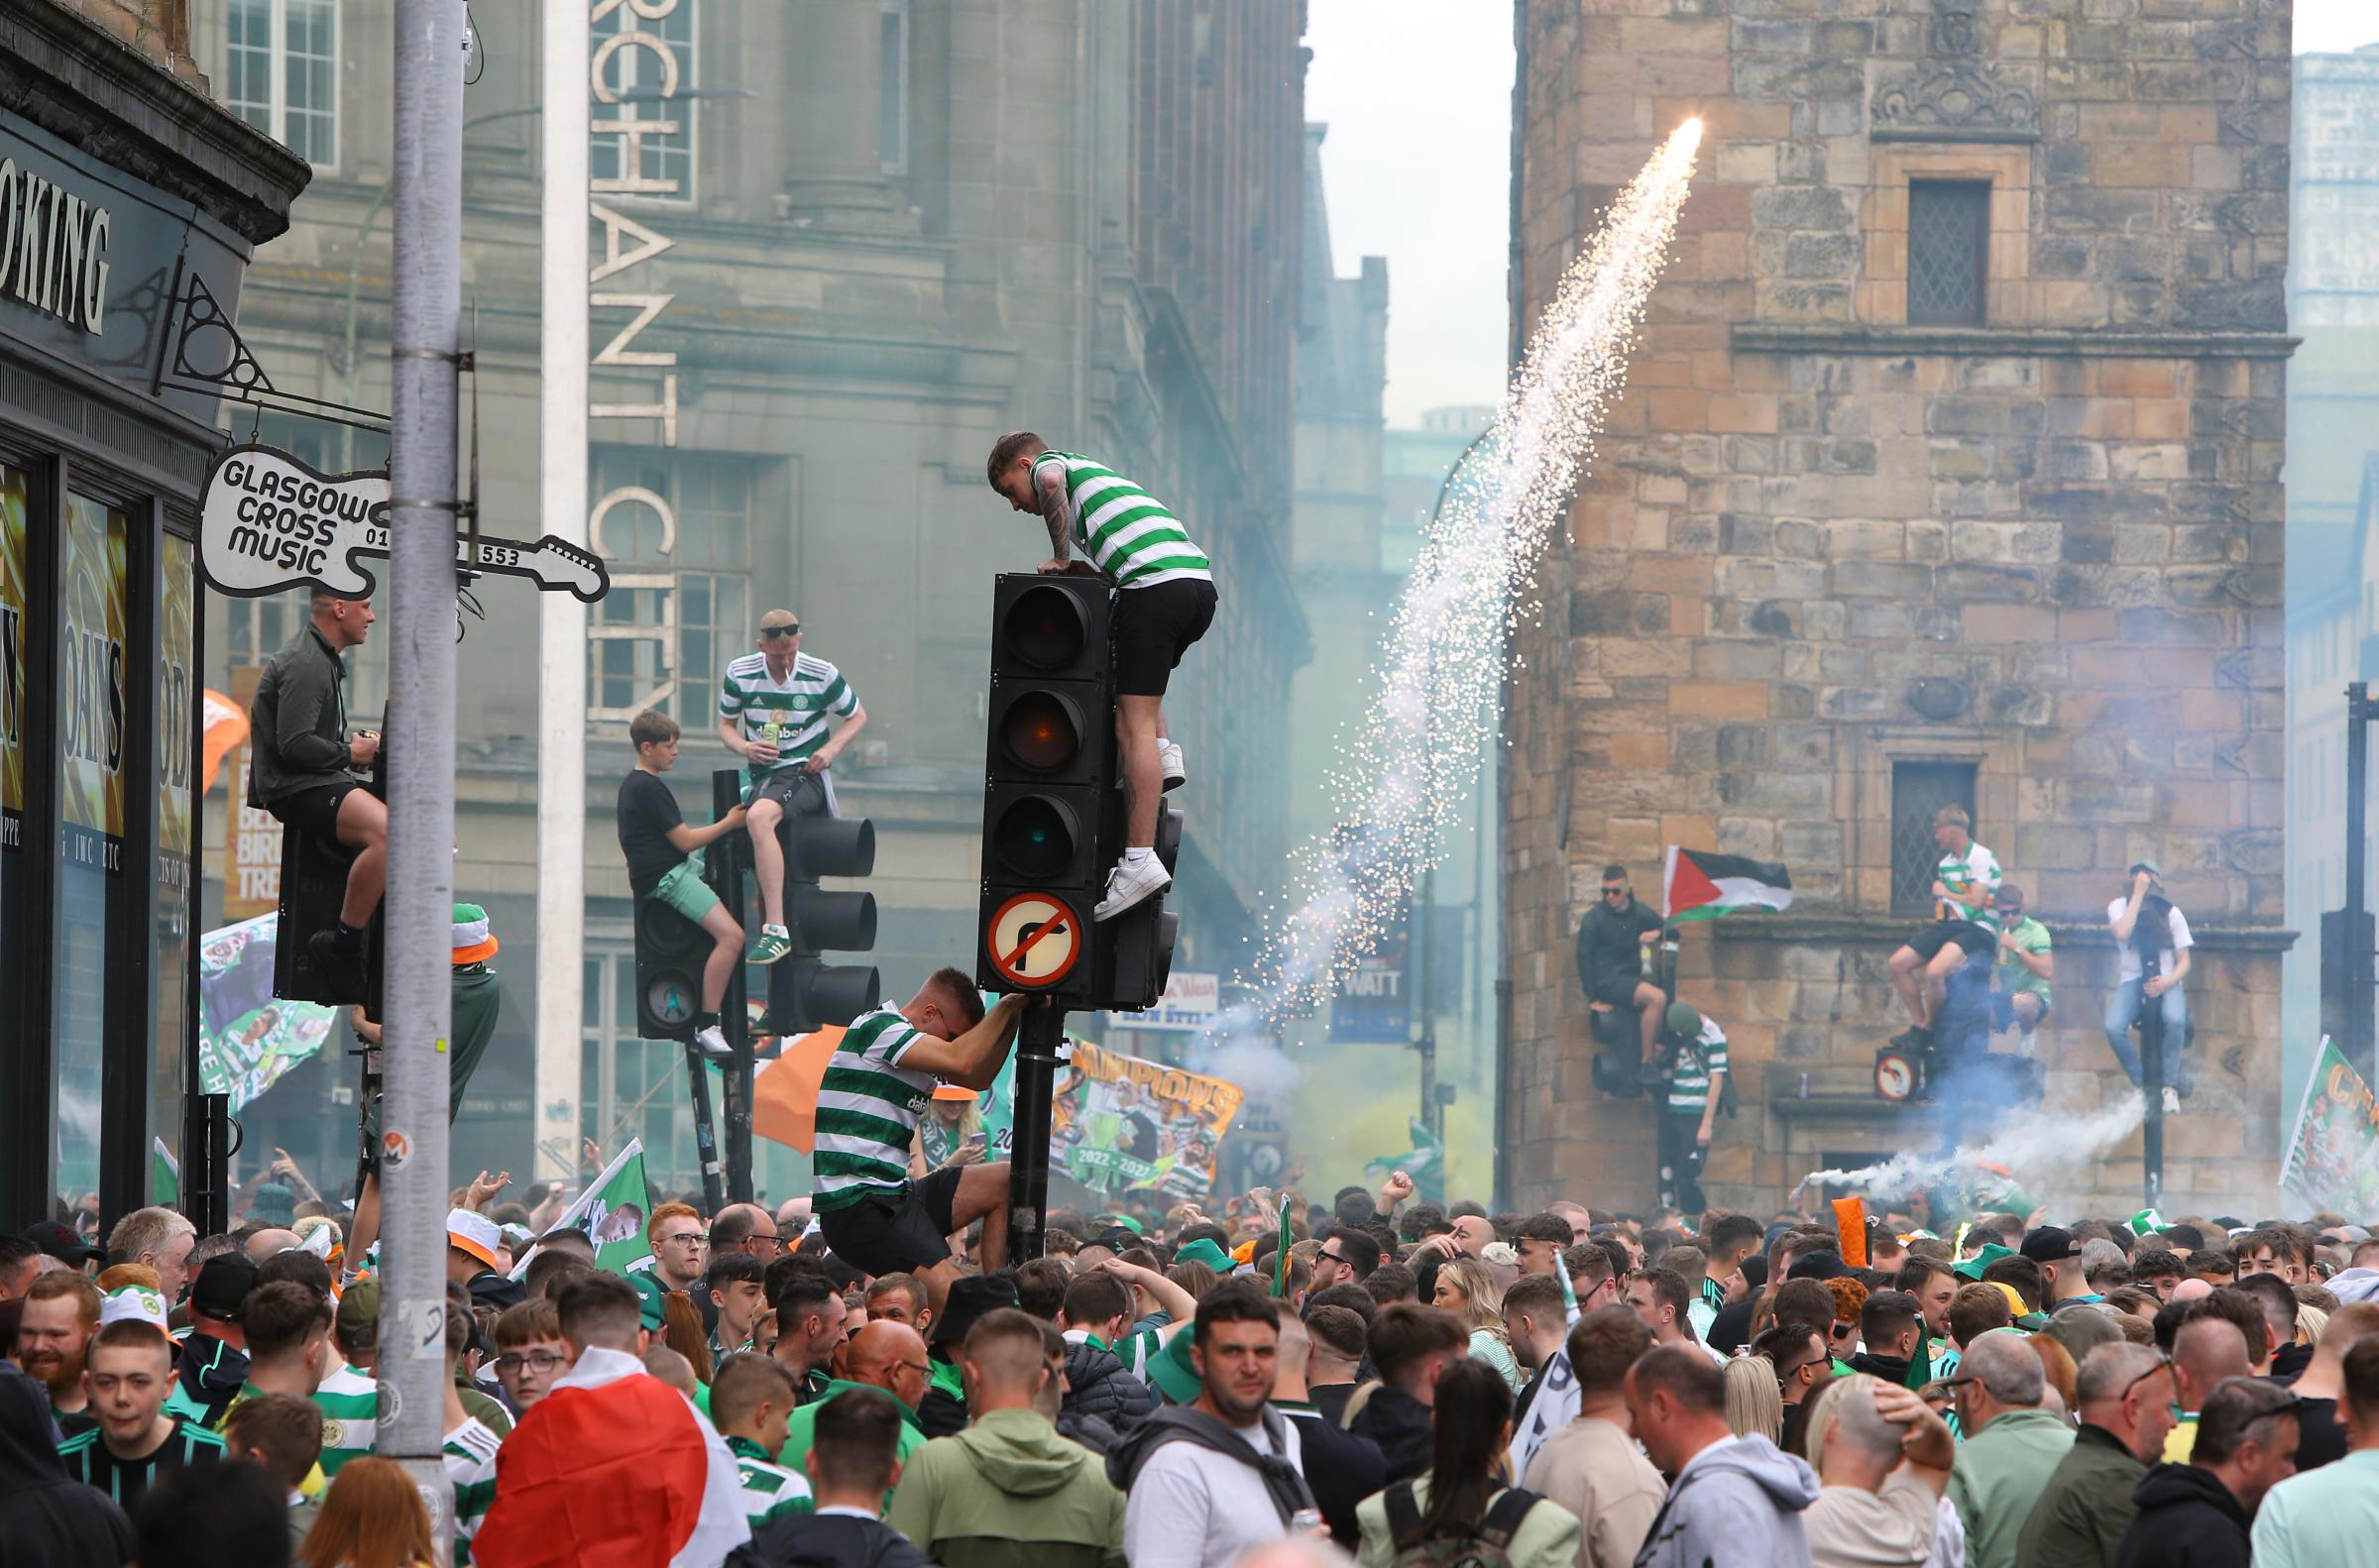 Celtic title party likely to bring Glasgow 'disruption' say police